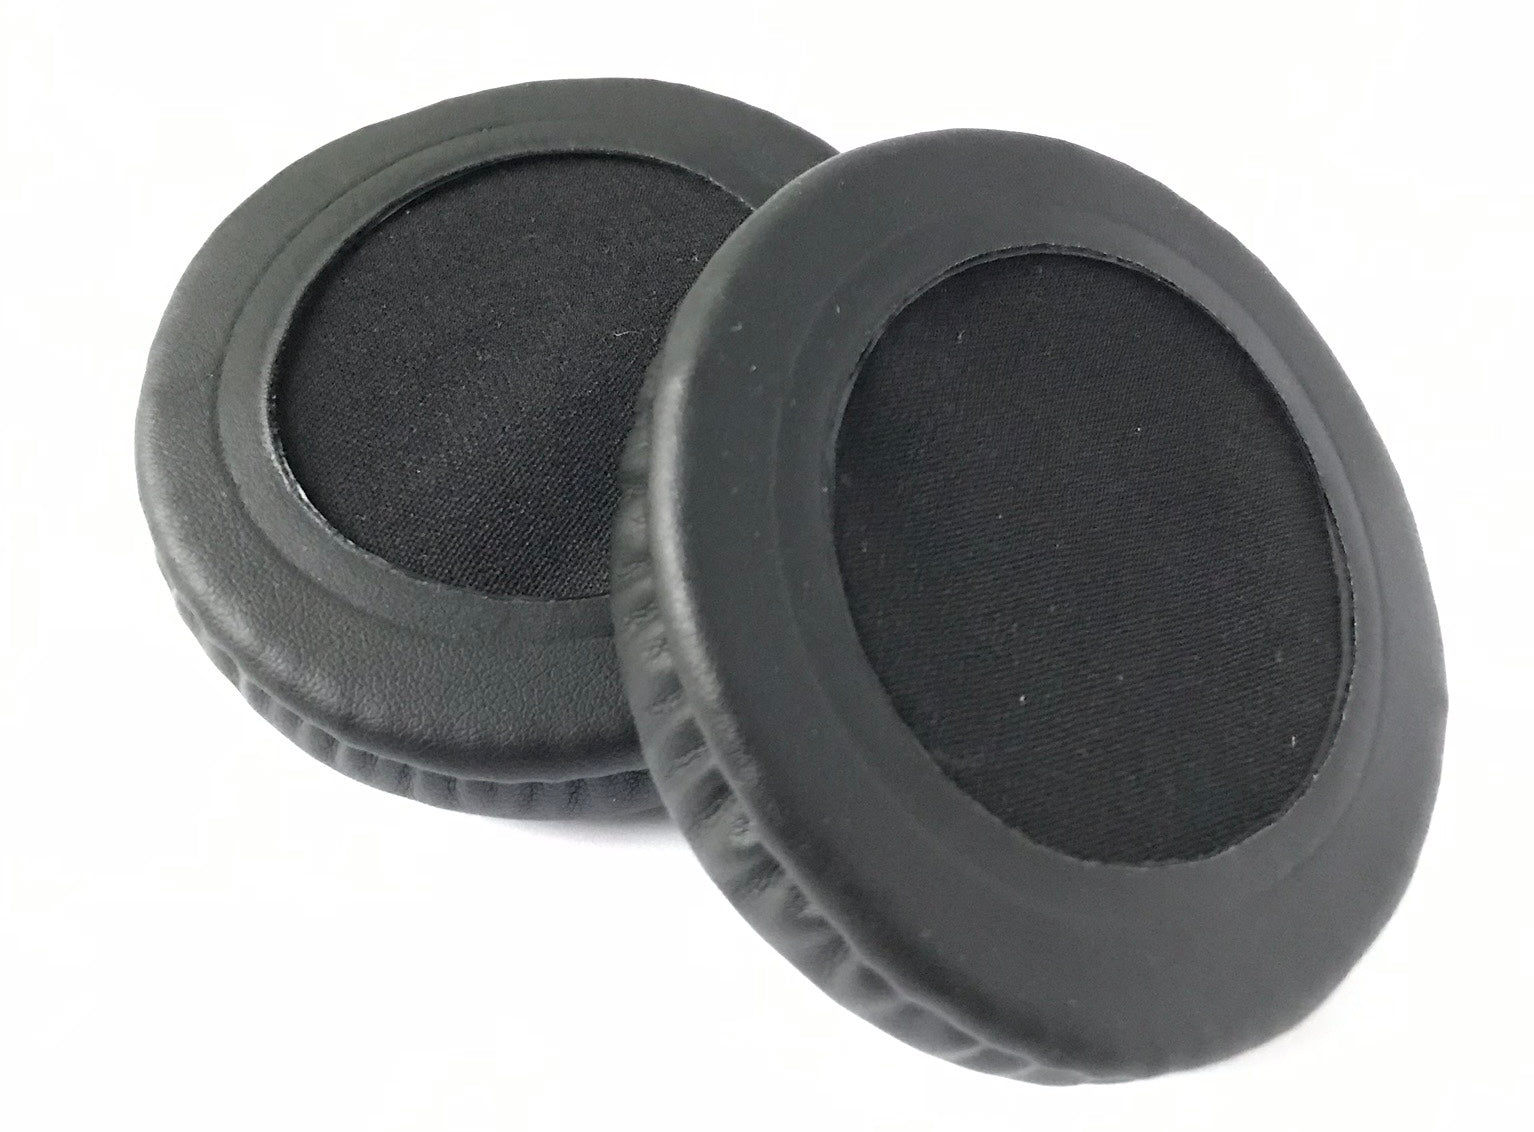 Replacement Ear Pad Cushions for JBL E50BT E50 S500 S700 Synchros AKG K545 K845BT K540 Headphones - CentralSound